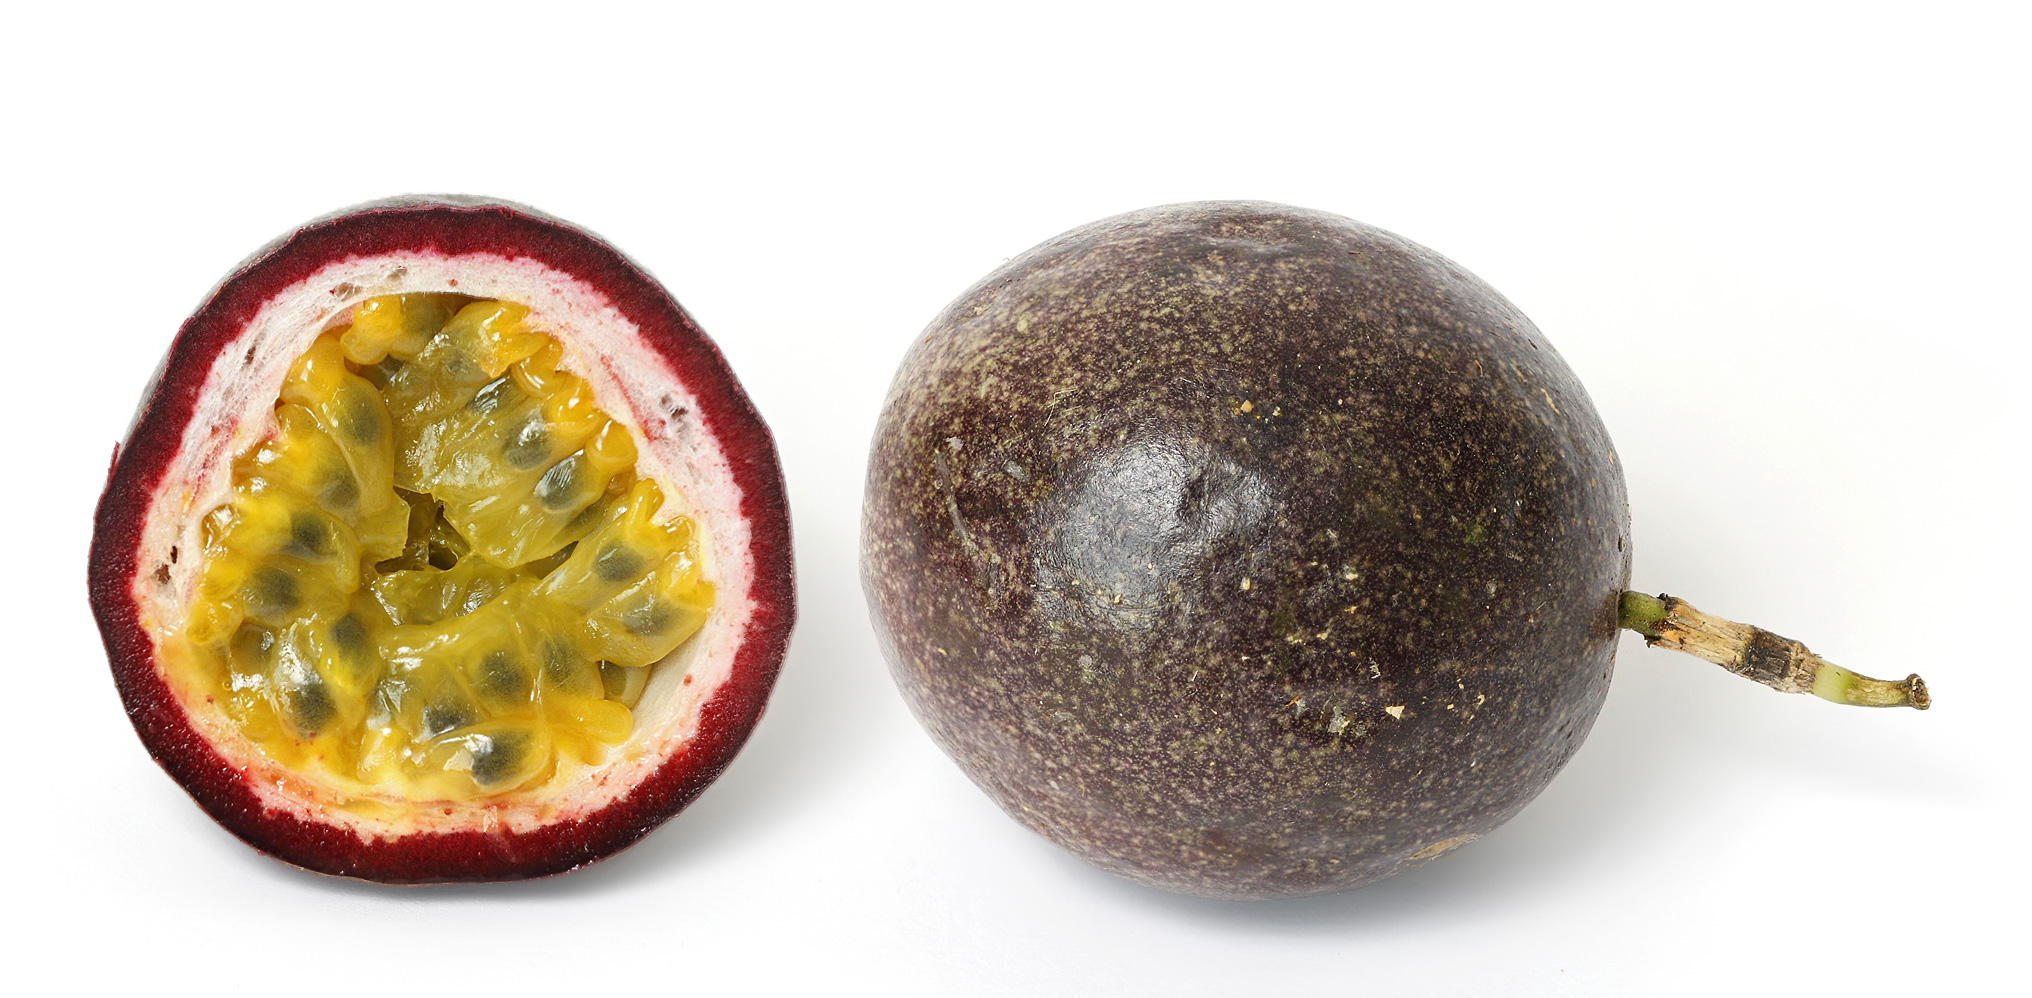 Passionfruit and cross section